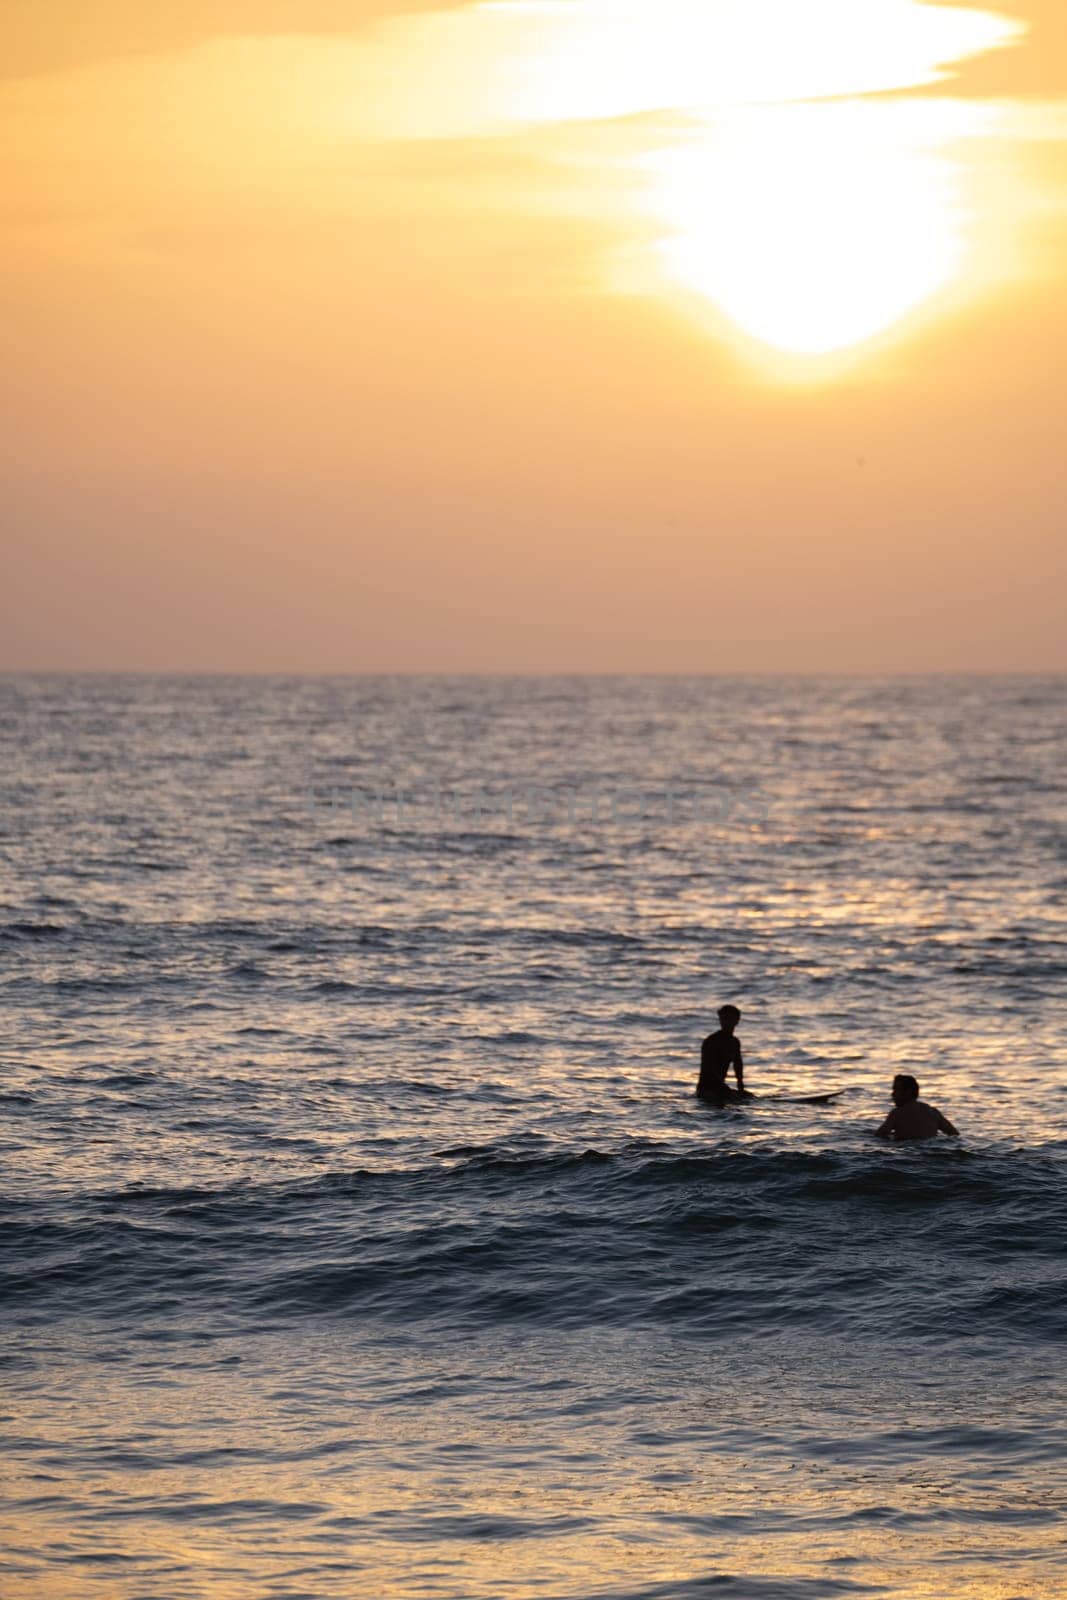 Surfer silhouettes in the ocean at sunset by homydesign